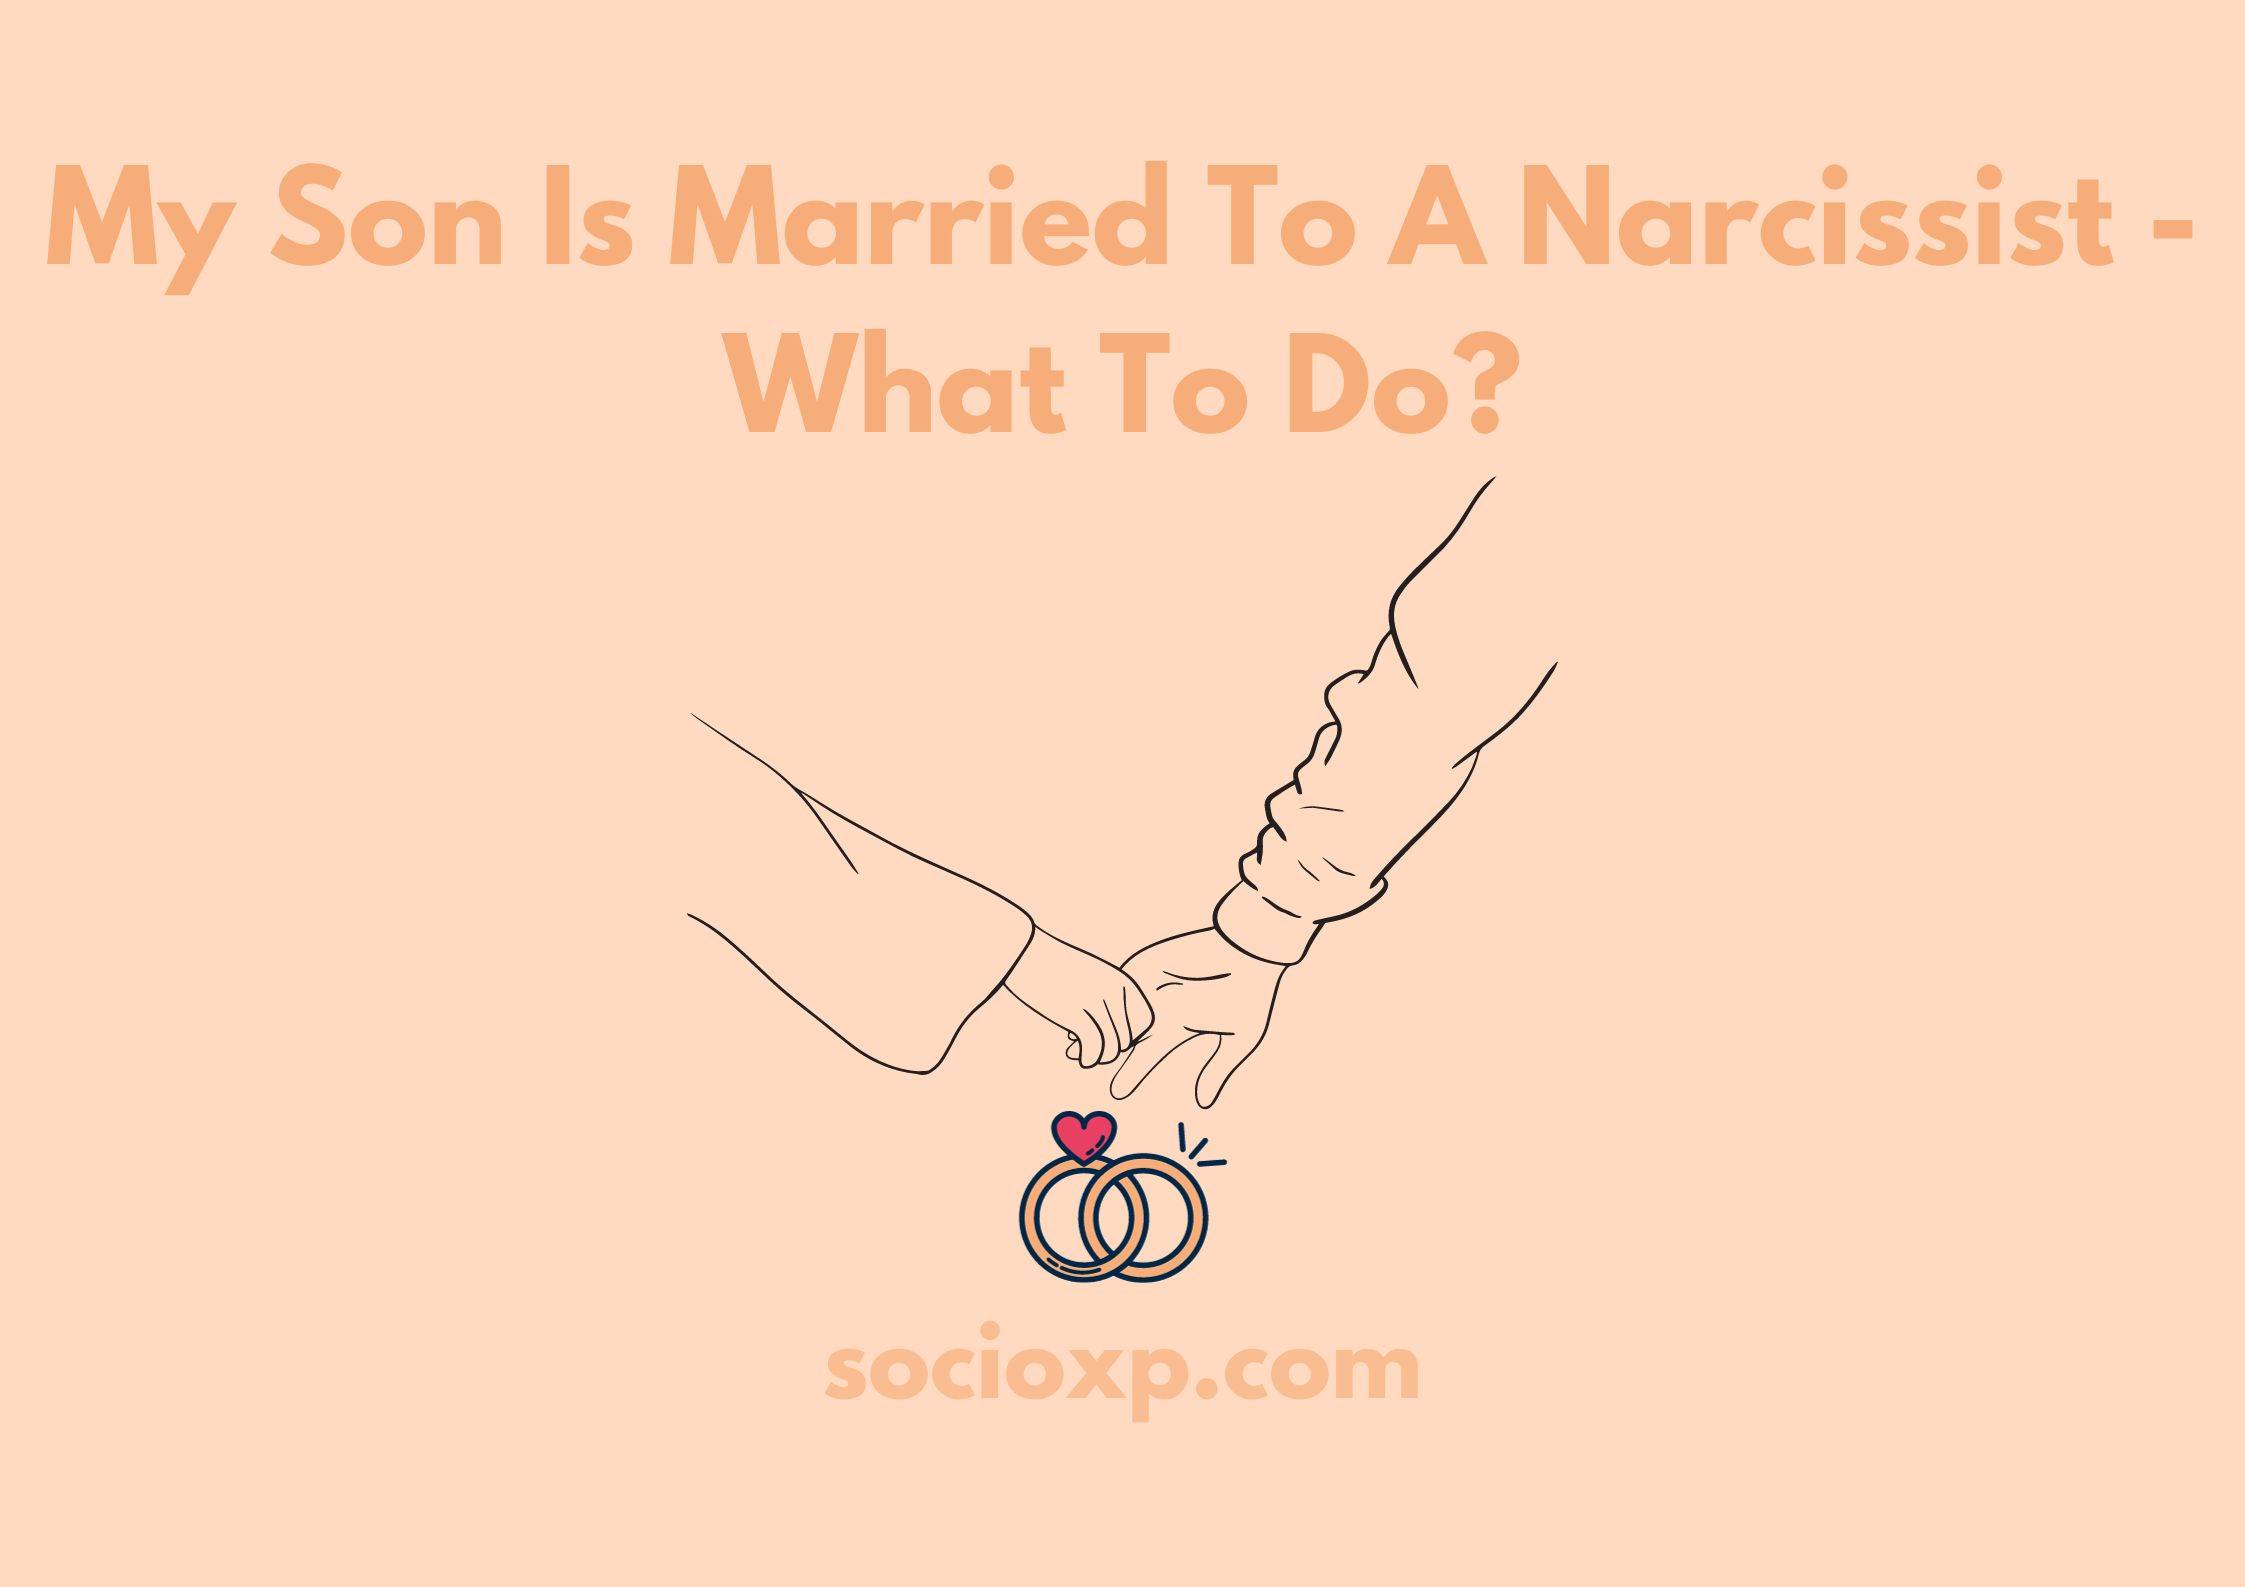 My Son Is Married To A Narcissist - What To Do?